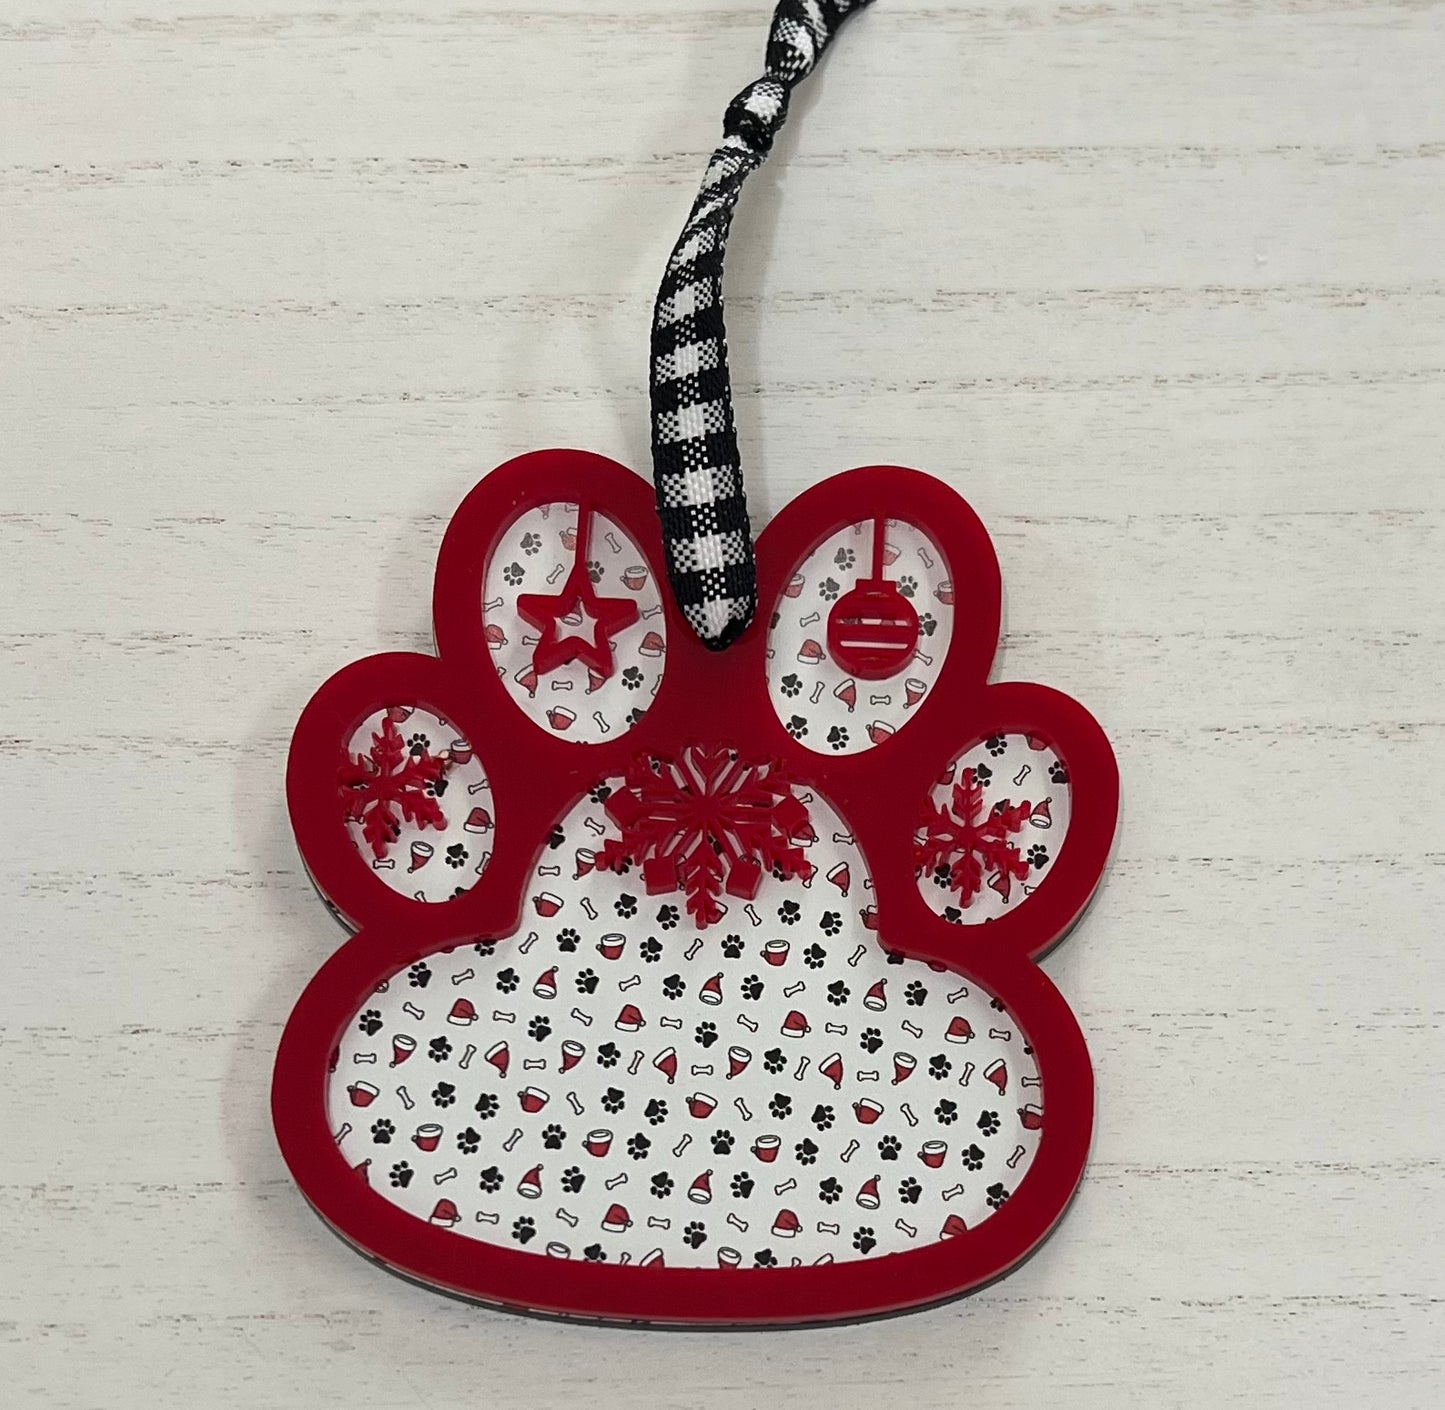 Personalized pet paw ornament